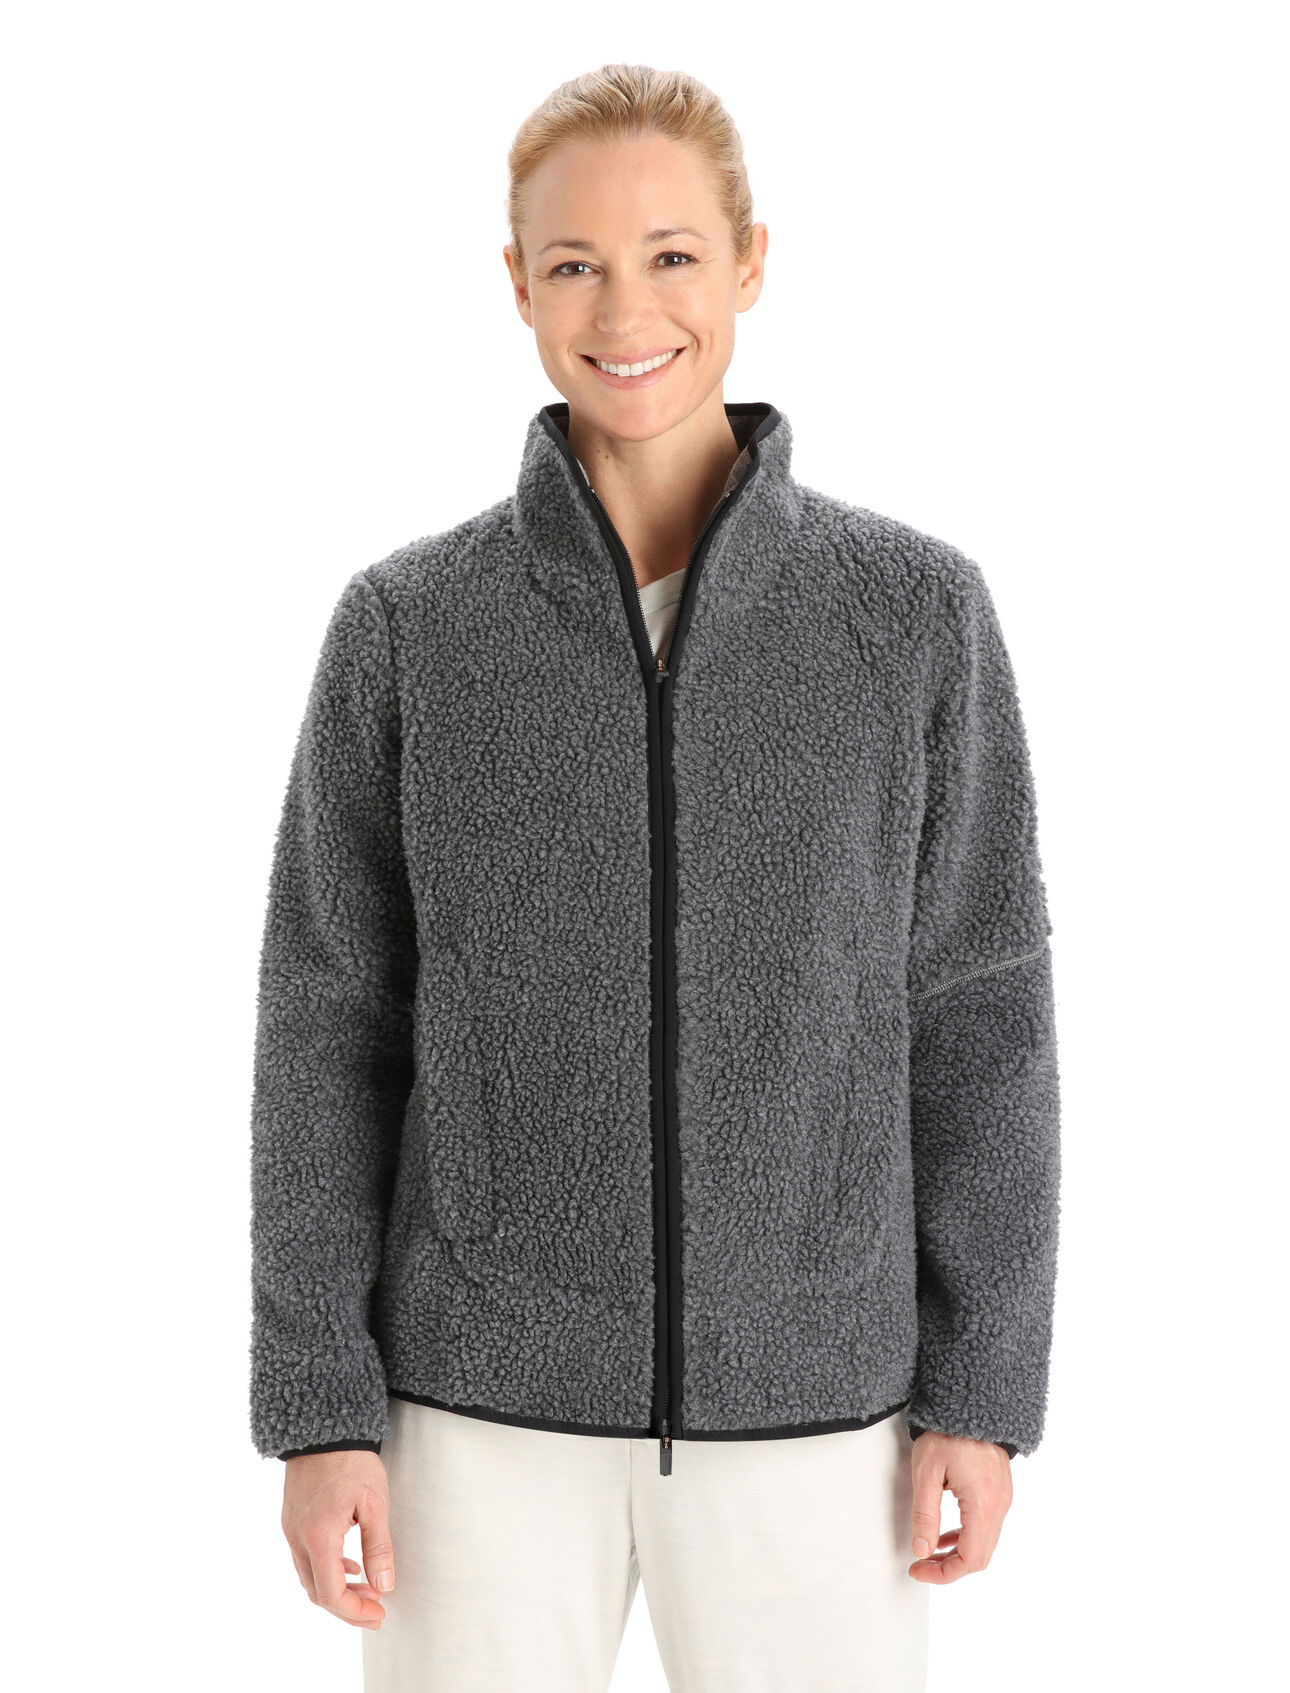 Womens RealFleece™ Merino High Pile Long Sleeve Zip With classic outdoor style and the natural benefits of merino wool, the RealFleece™ High Pile Long Sleeve Zip is a warm, stylish and ultra-comfortable fleece ideal for urban adventures.